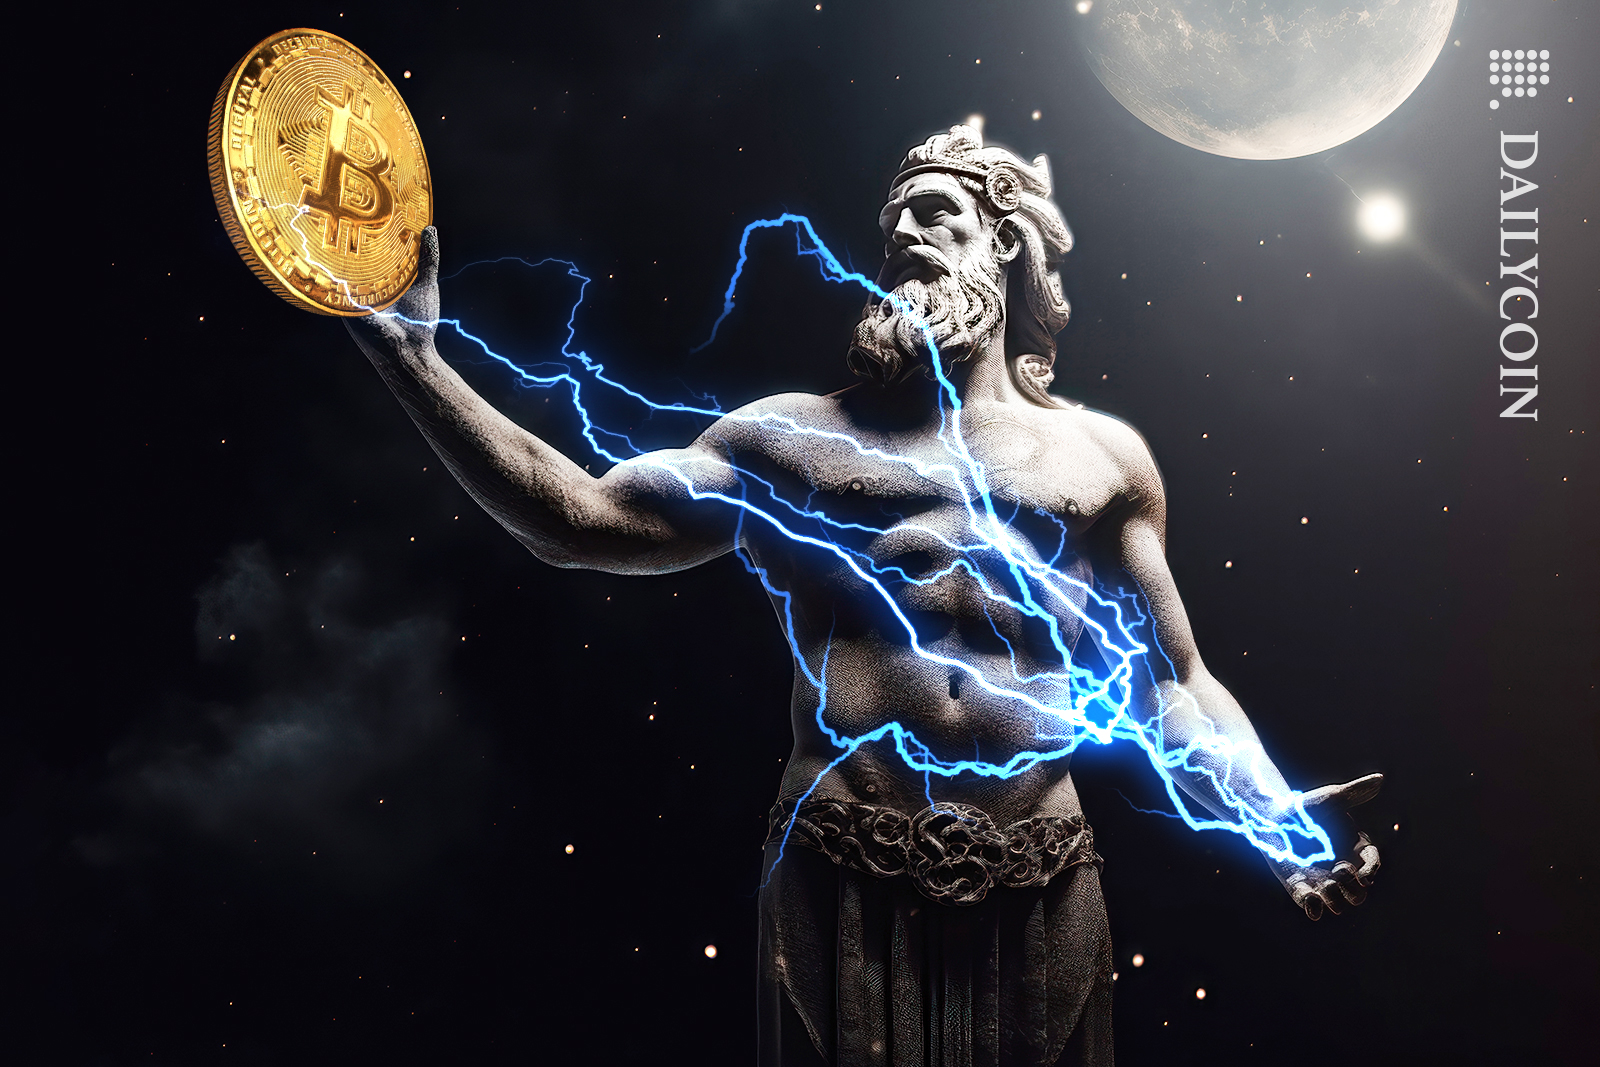 Zeus in the night, holding up a bitcoin and the other hand, is releasing lightning to power the bitcoin.